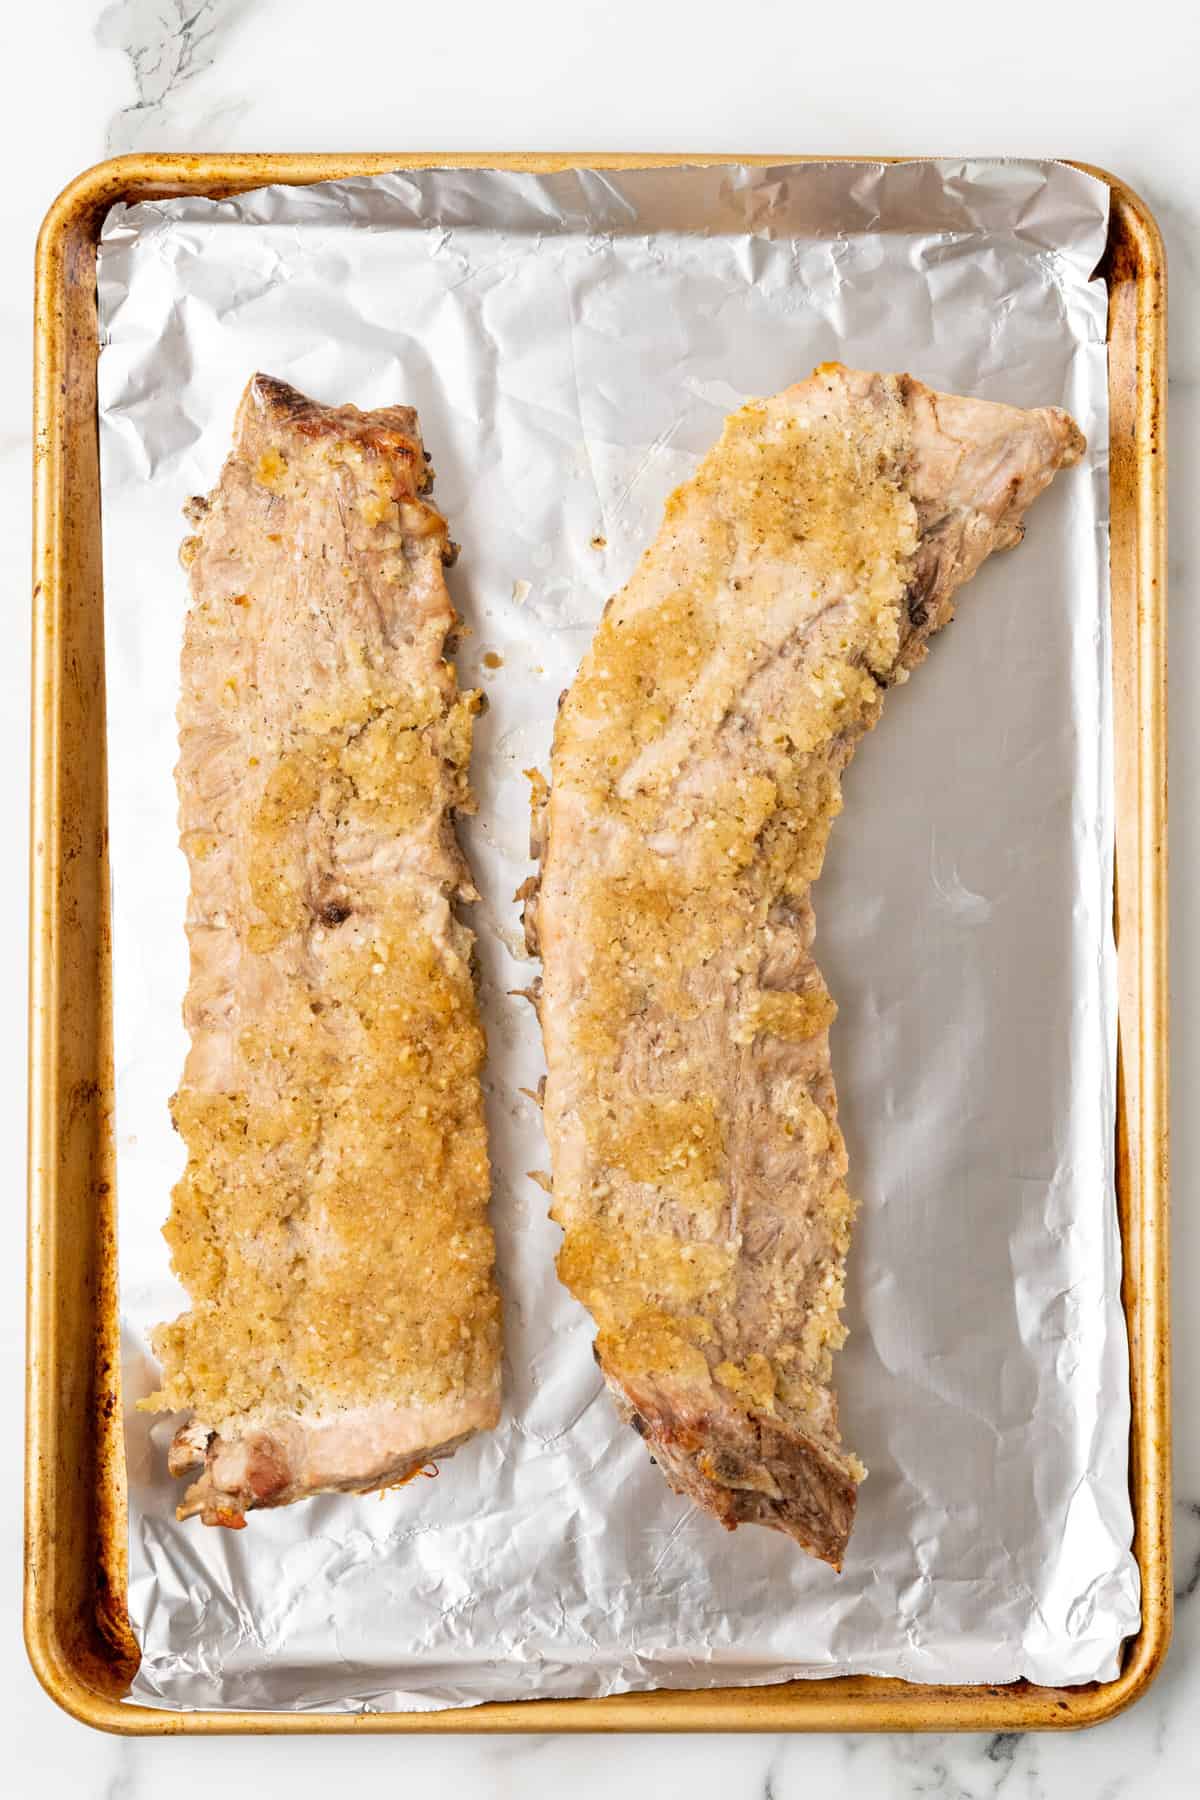 Oven Baked Pork Ribs (Brazilian-Style) - Easy and Delish